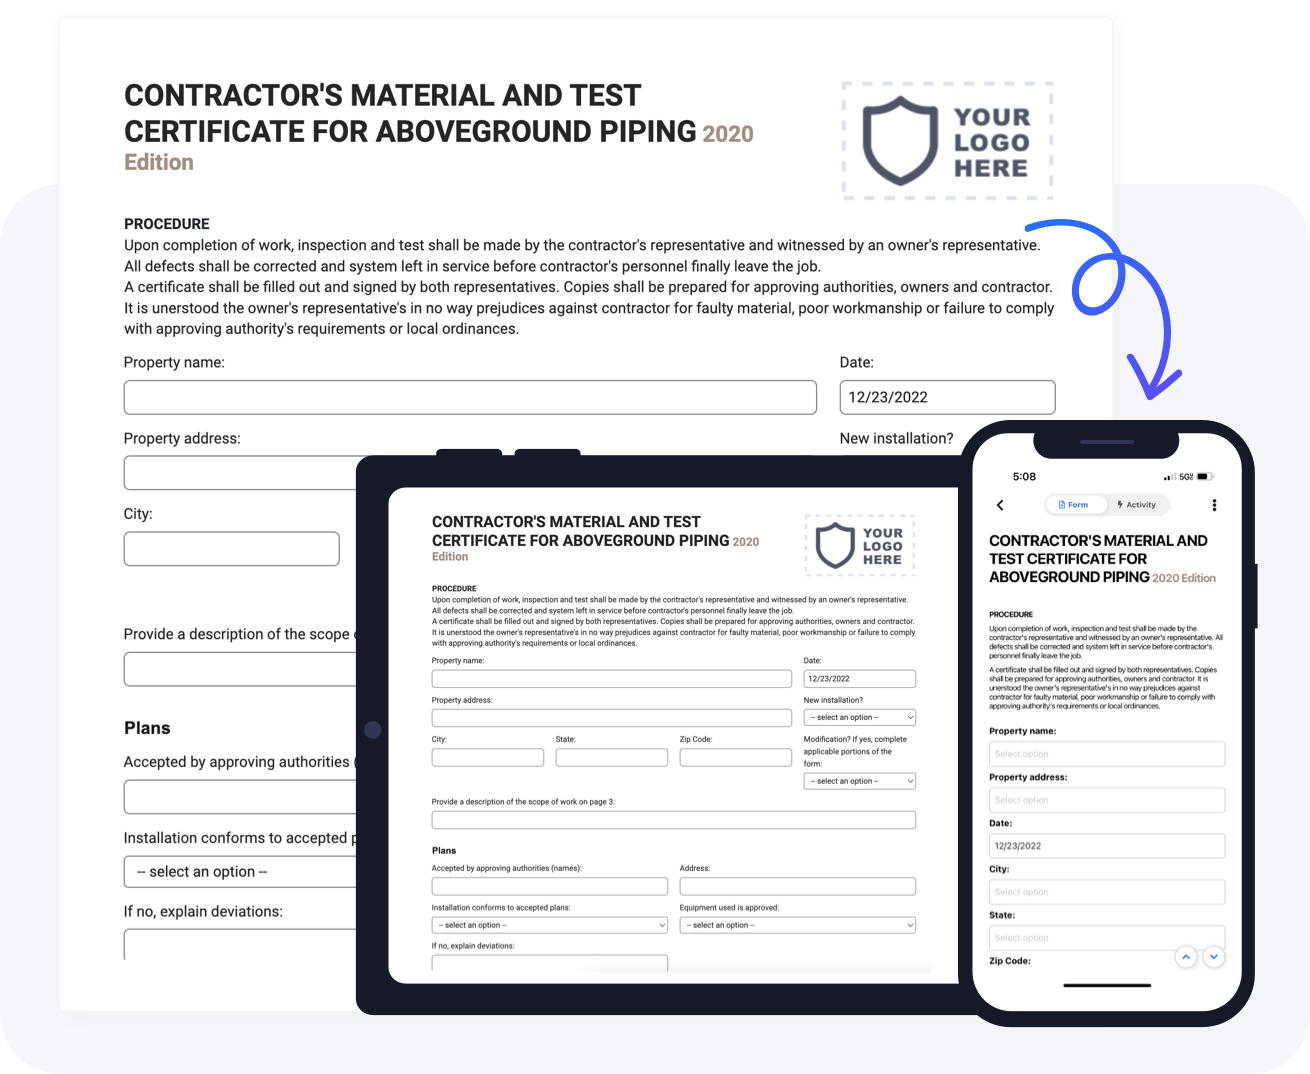 contractor’s material and test certificate for aboveground piping form